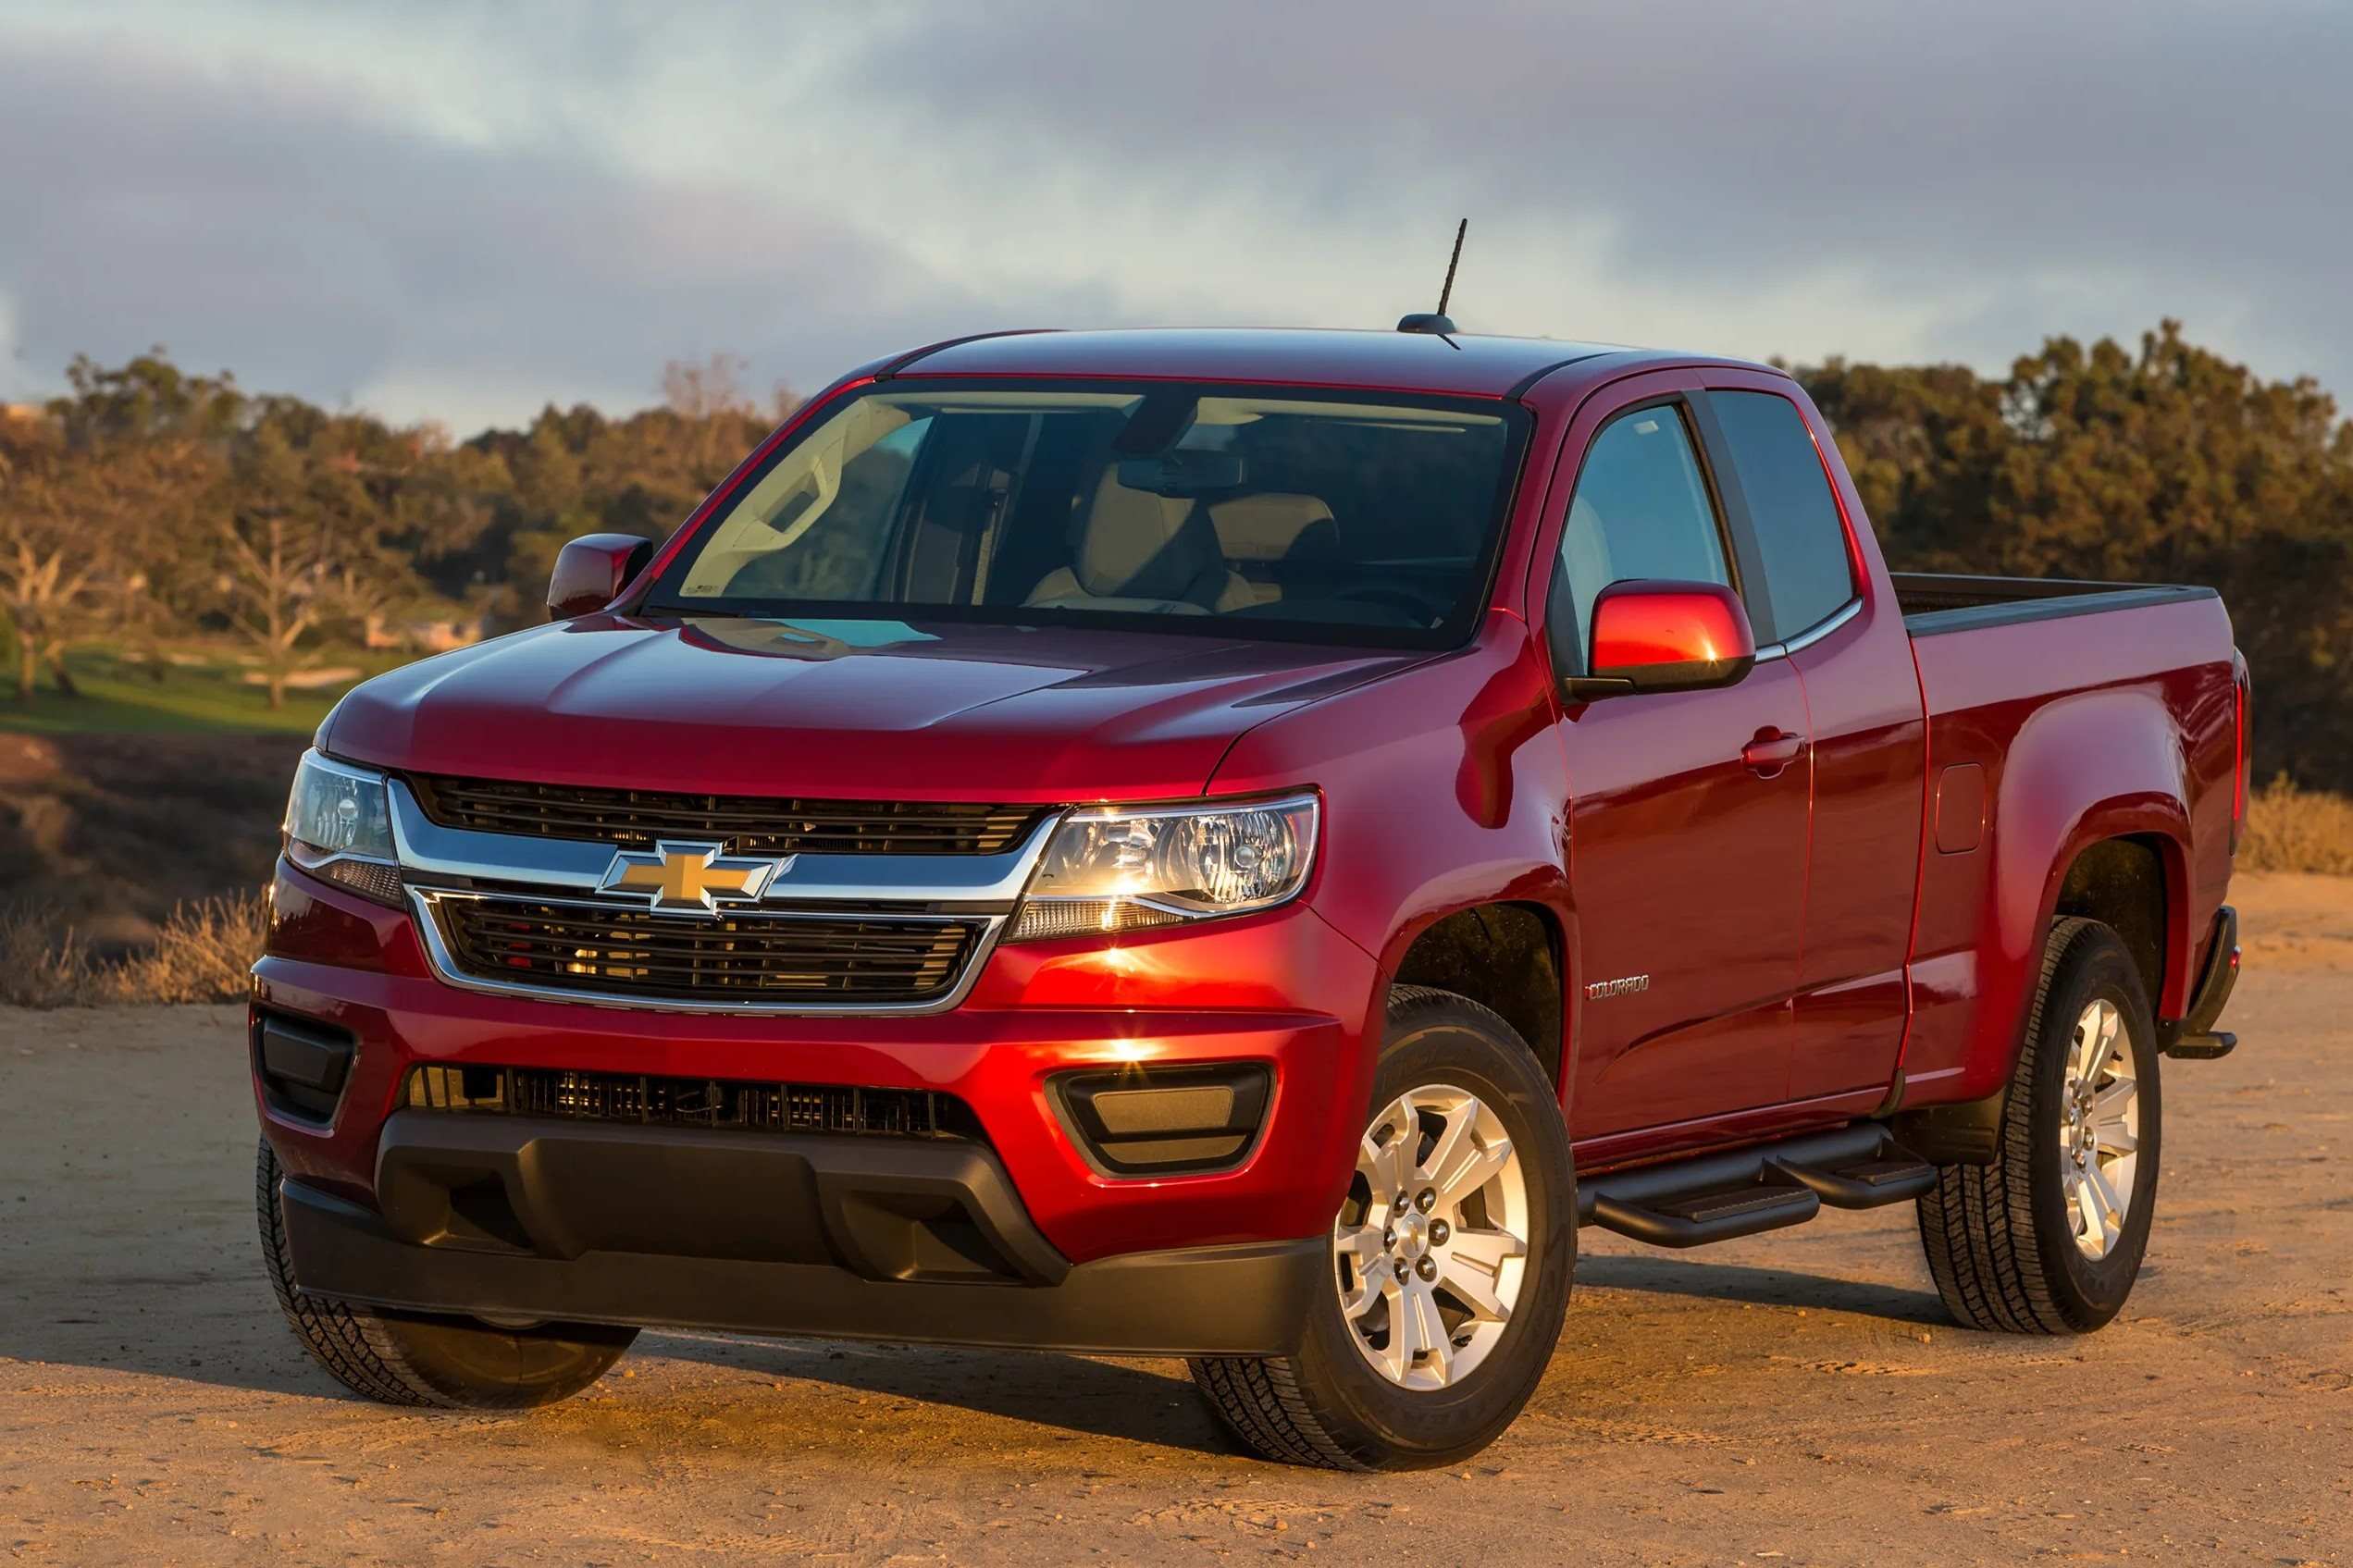 Discover The Unbeatable Power And Performance Of The 2015 Chevy Colorado!